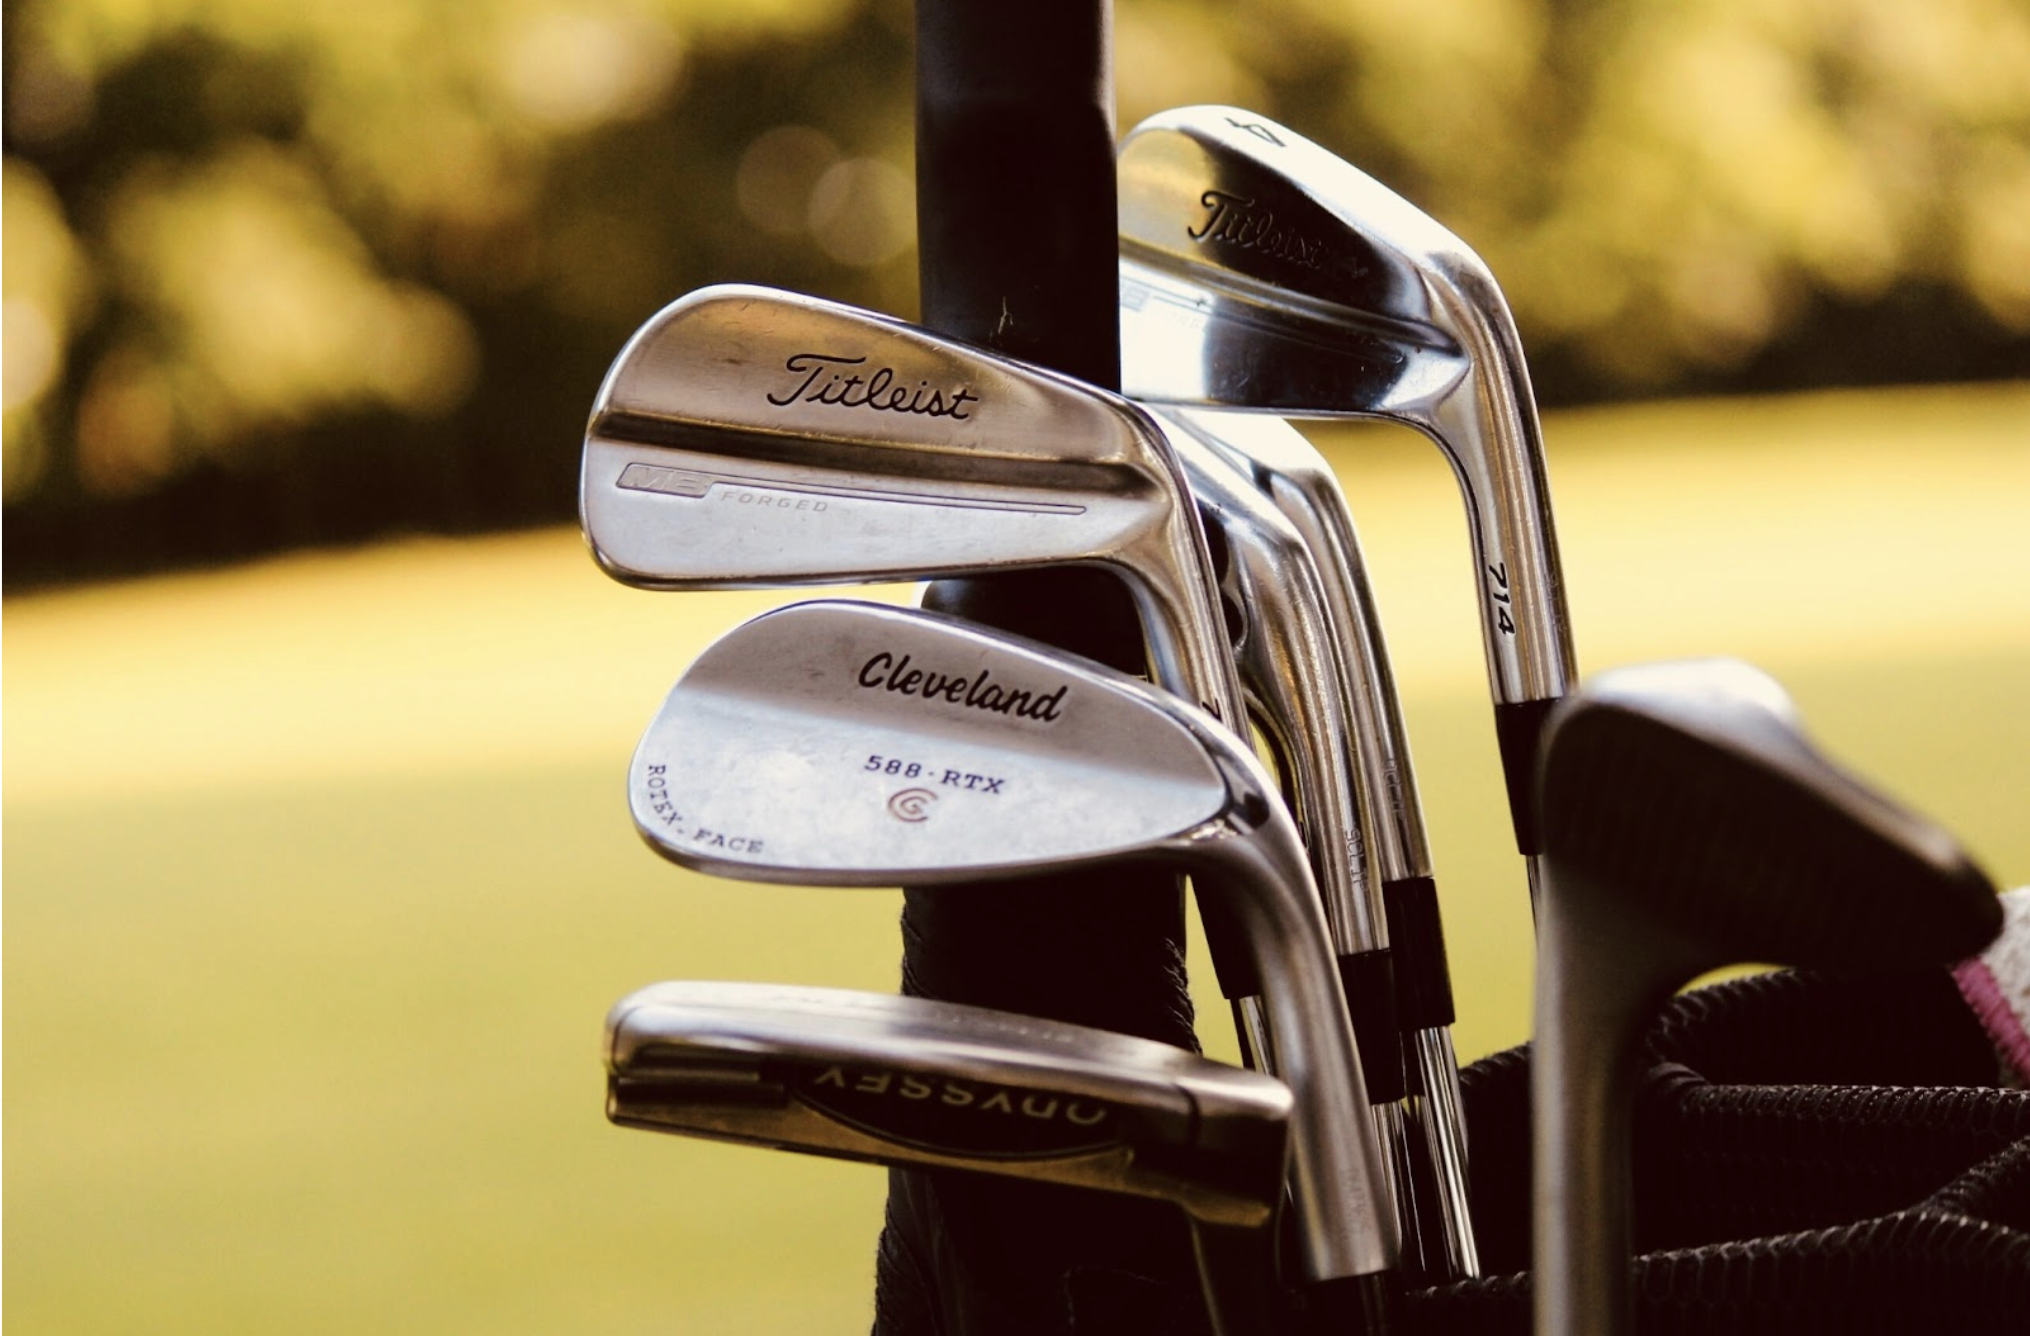 The Ultimate 8 Iron Guide: How to Hit an 8 Iron